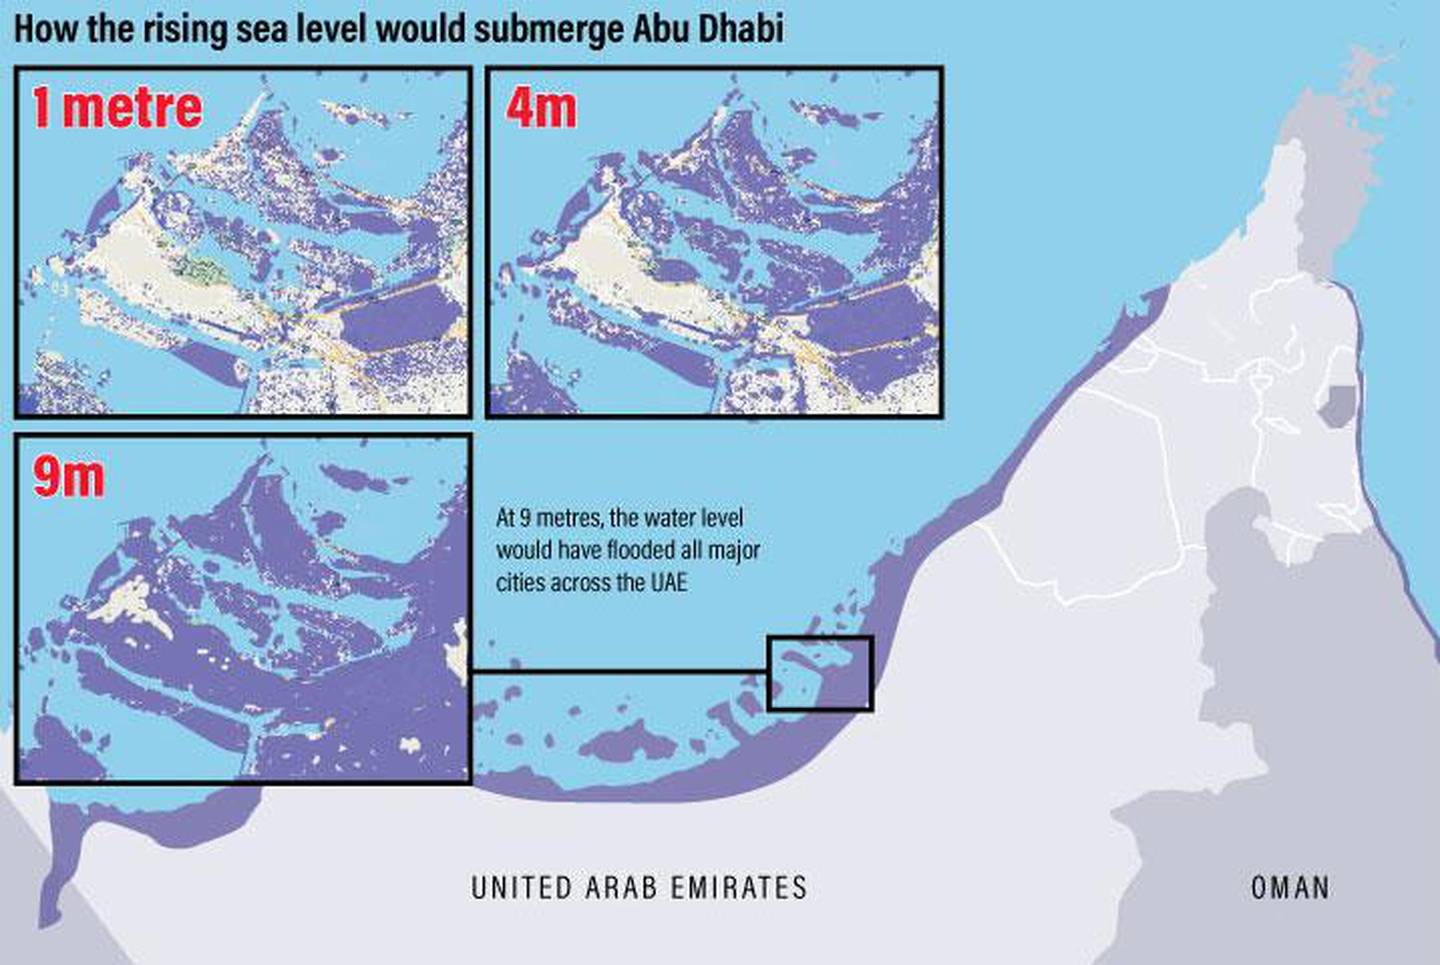 How Abu Dhabi would be affected by rising sea levels.